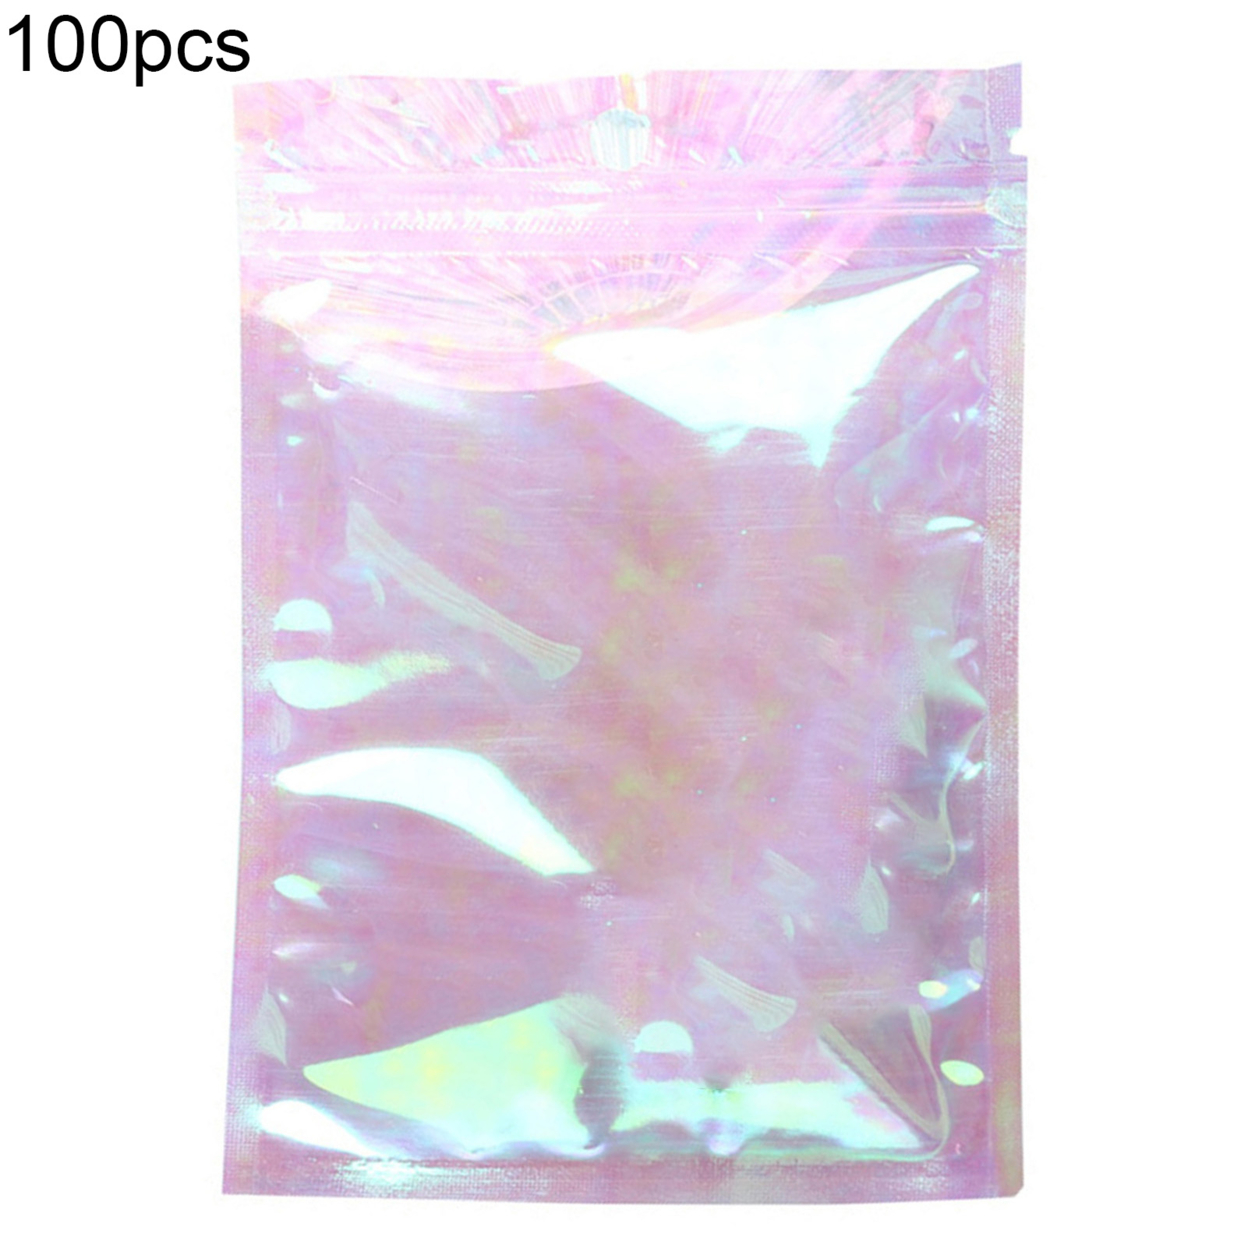 100Pcs Holographic Bags Dust-proof Large Capacity PET Flat Clear Zippered Resealable Bags for Jewelry - 18x26cm